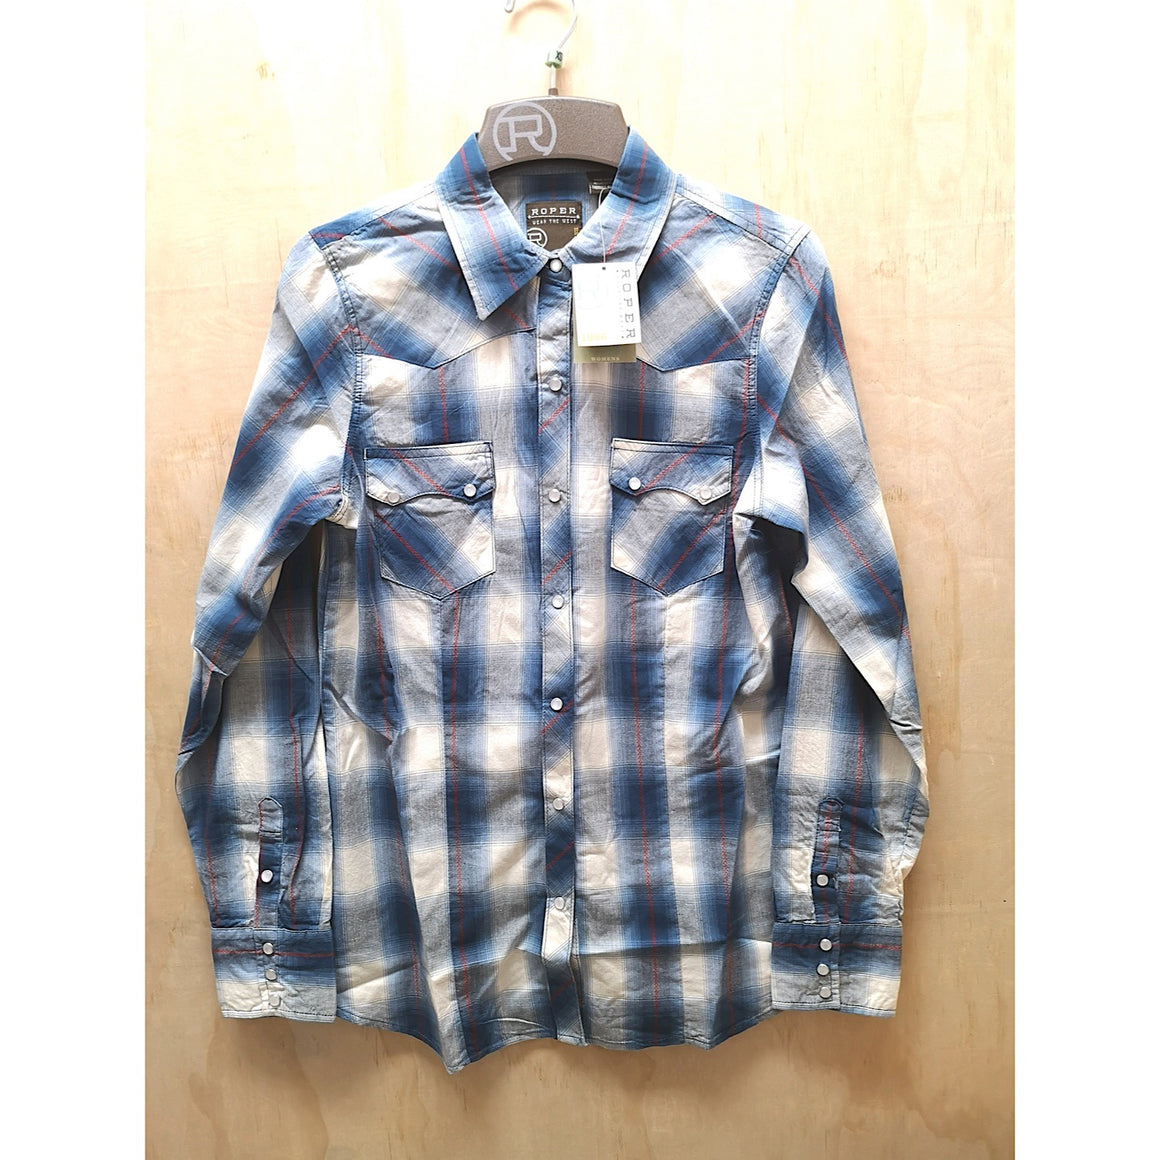 Roper Womens West Made Collection L/S Shirt Plaid Blue